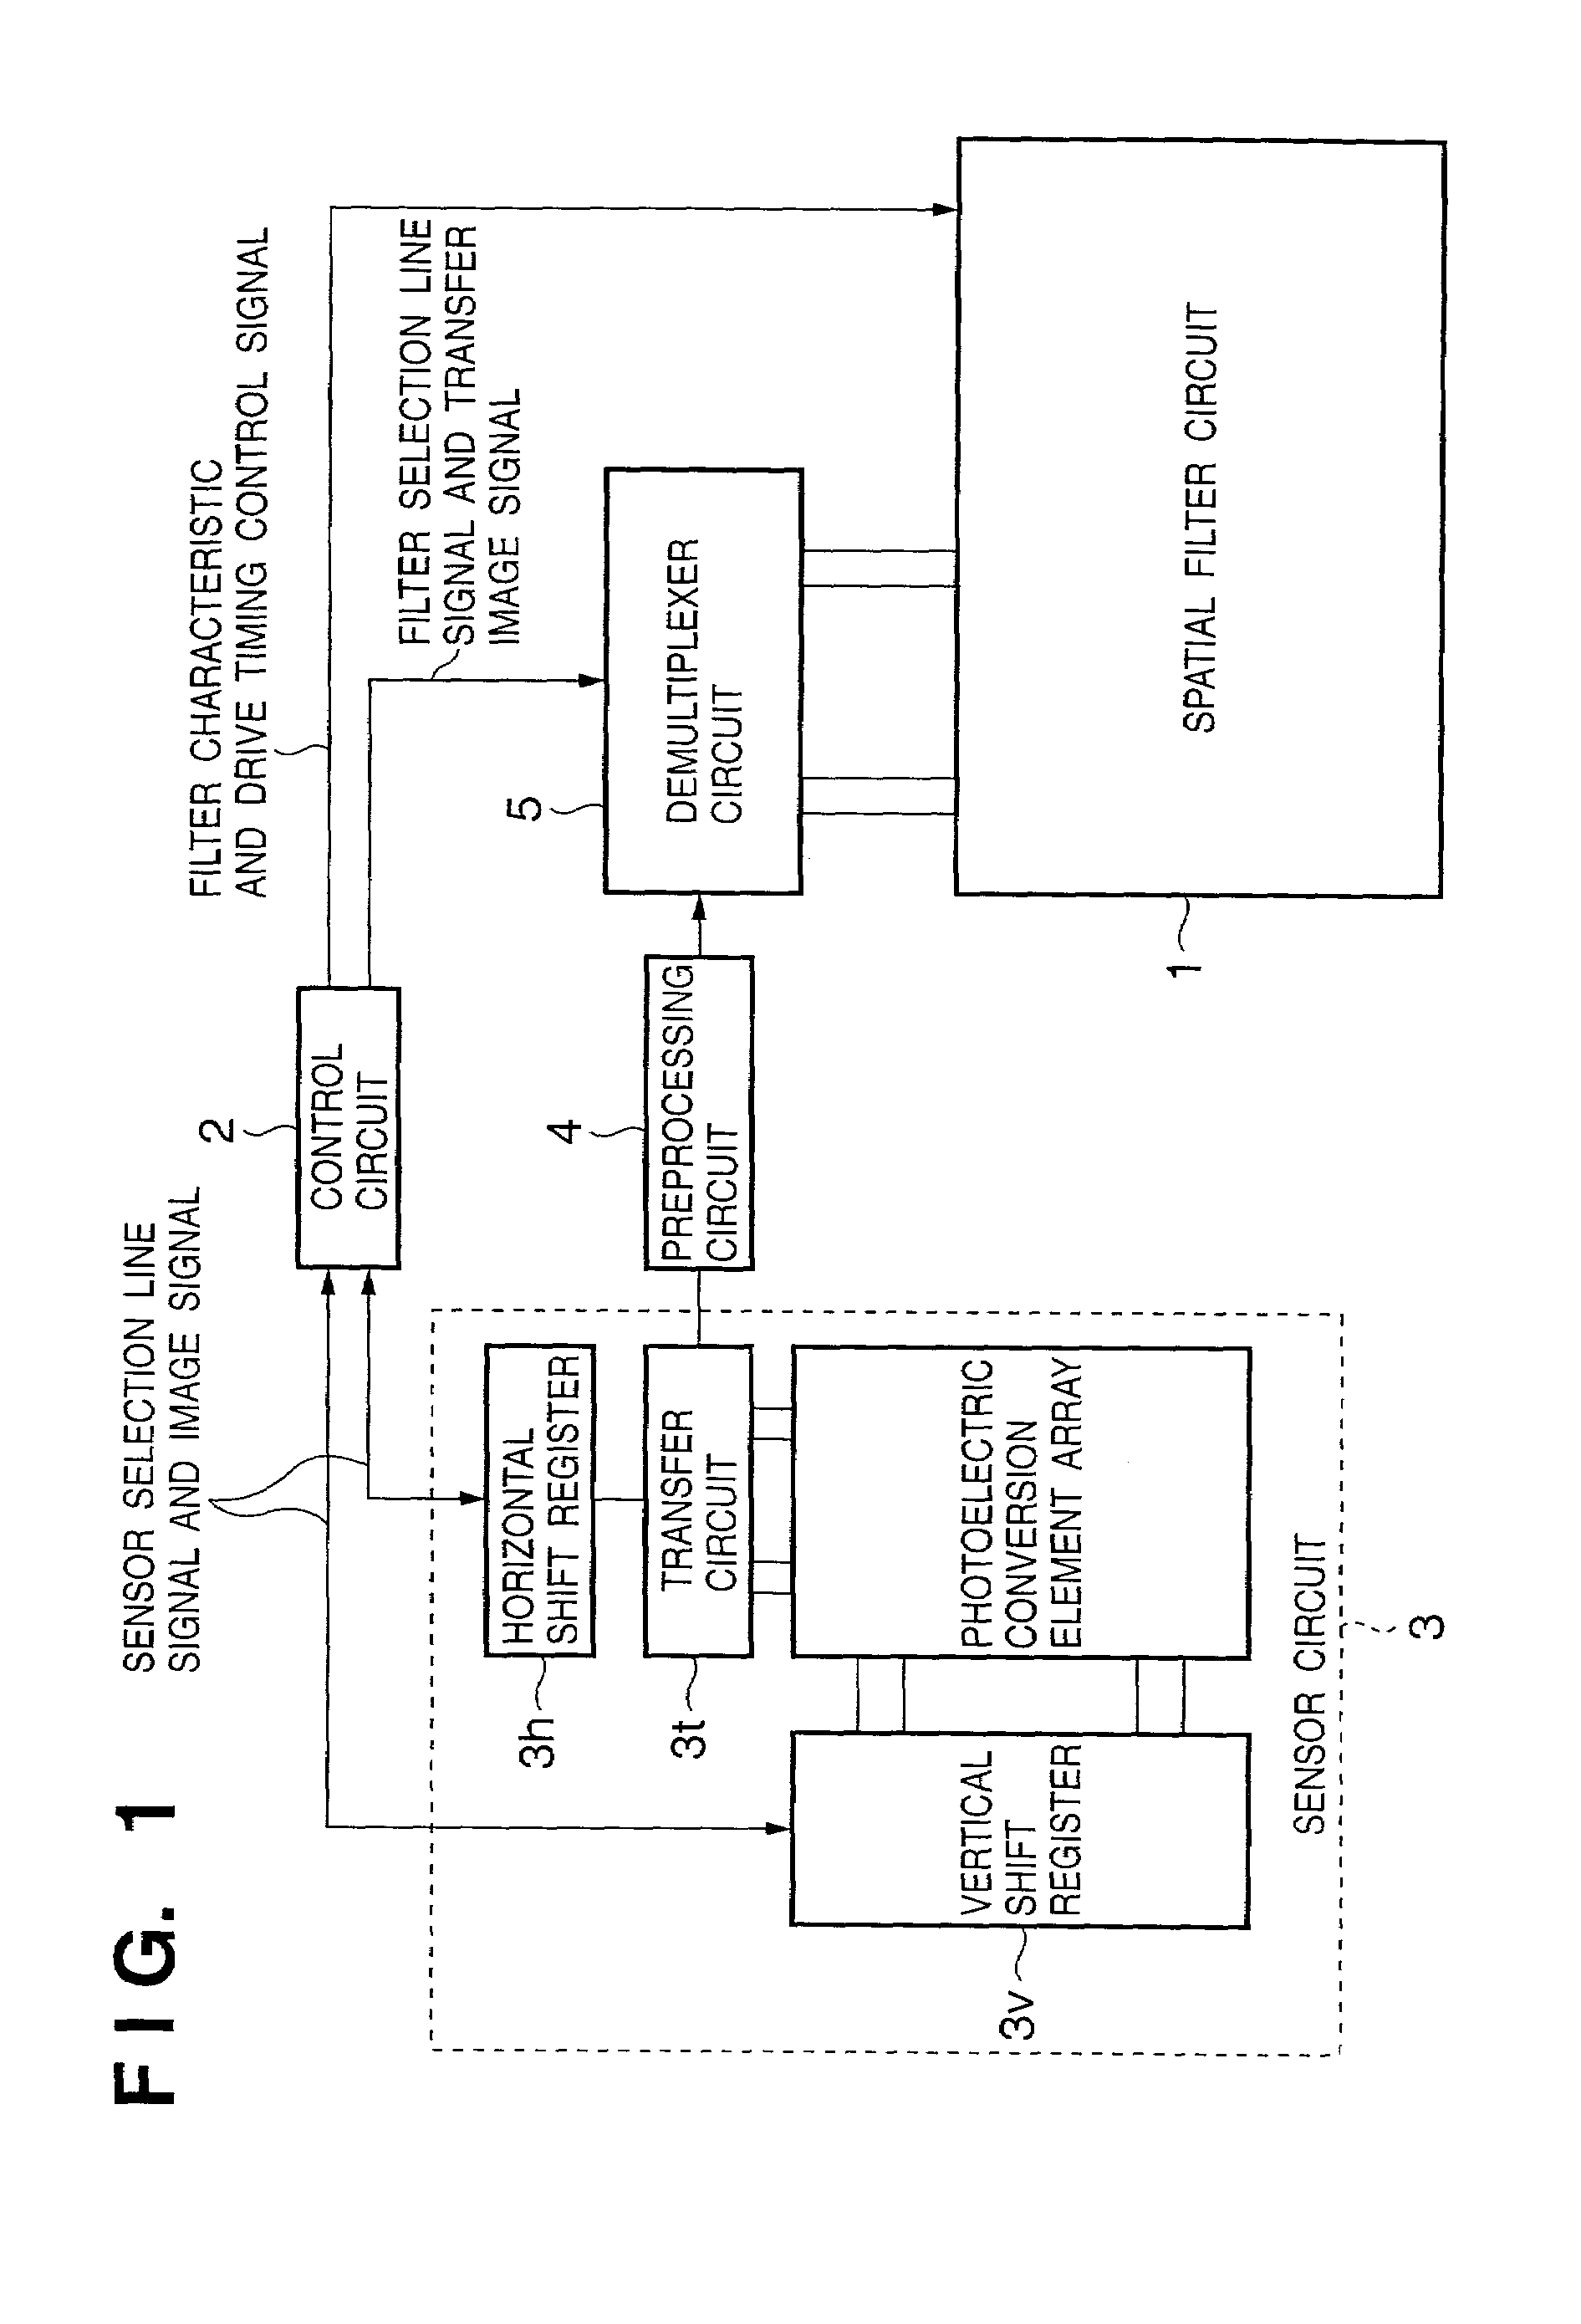 Dynamically reconfigurable signal processing circuit, pattern recognition apparatus, and image processing apparatus